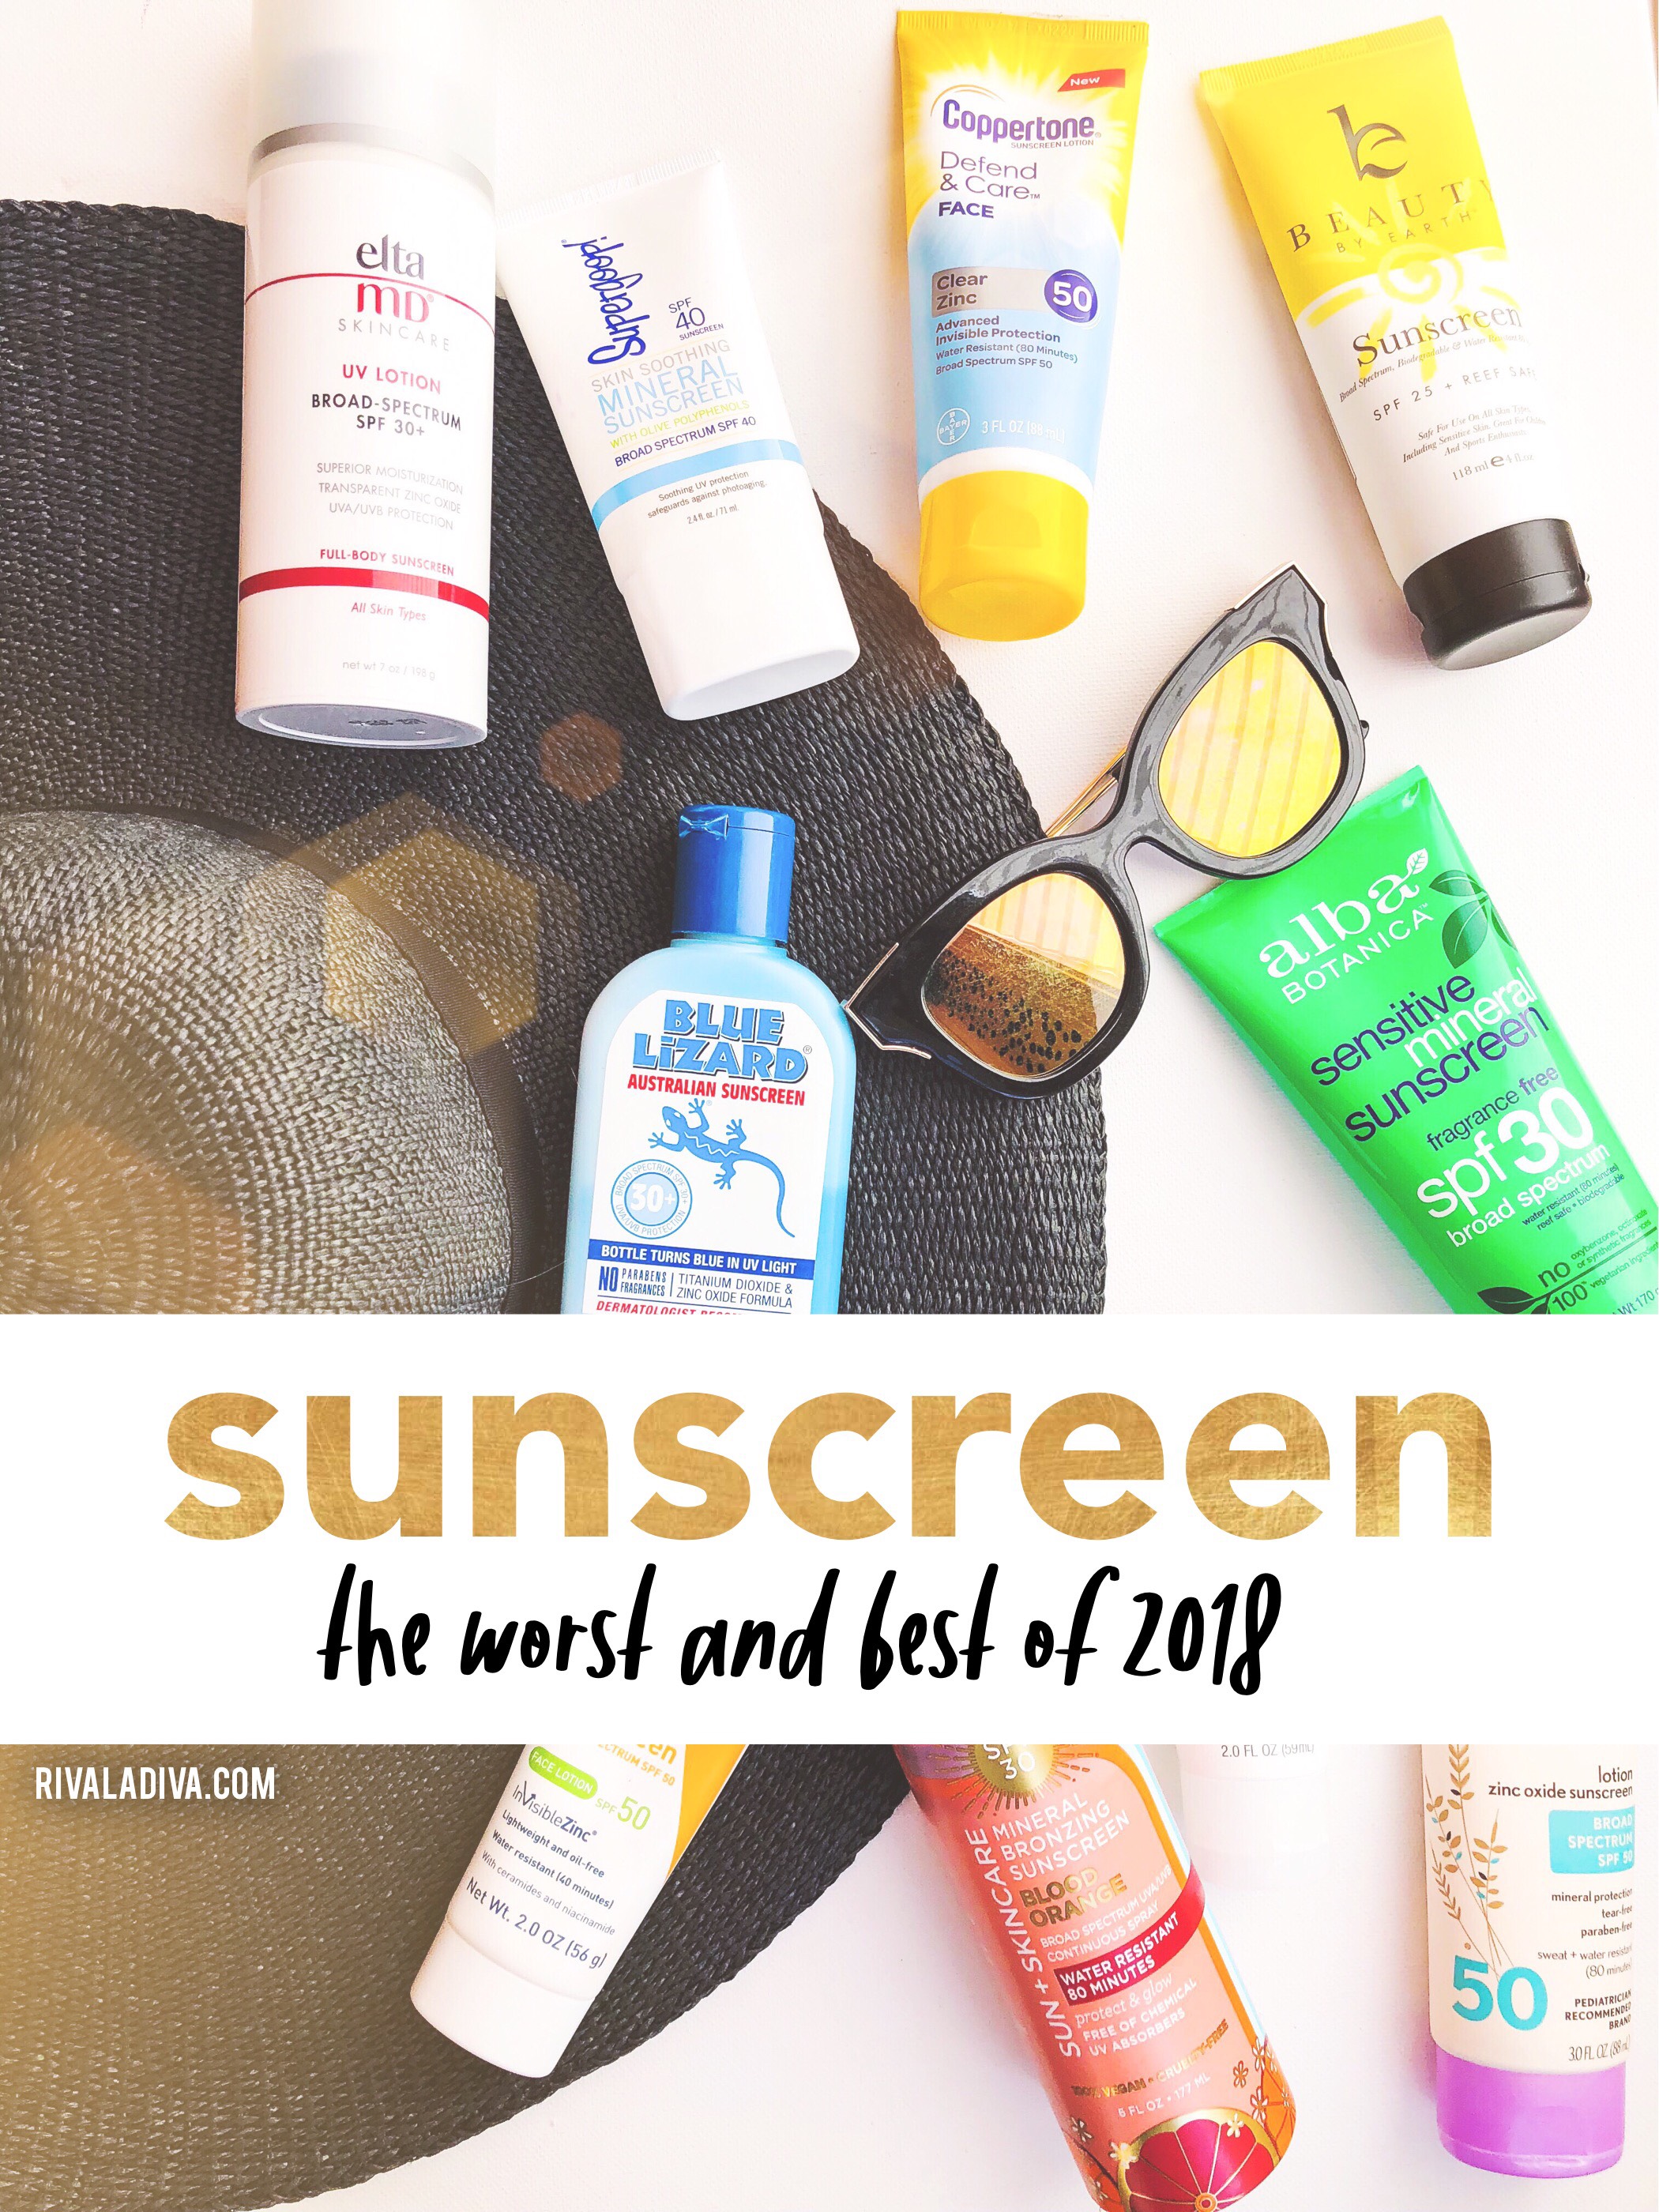 SUNSCREEN: the Worst and Best of 2018